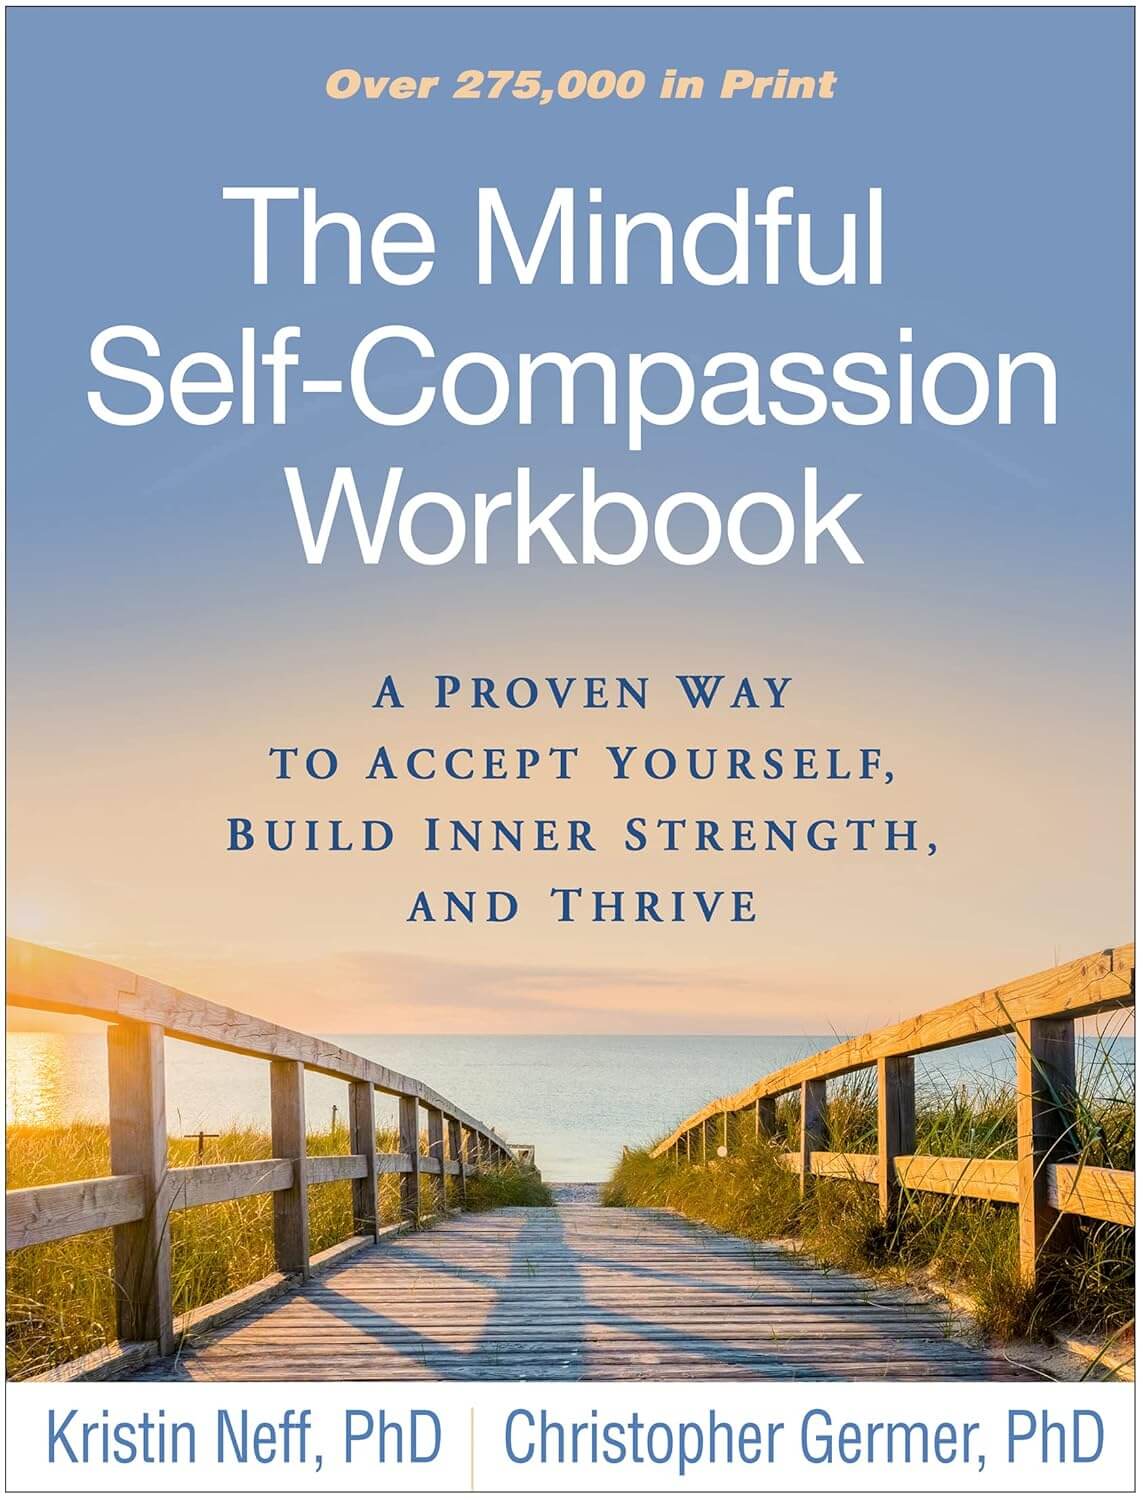 The Mindful Self-Compassion workbook: A proven way to accept yourself, find inner strength, and thrive